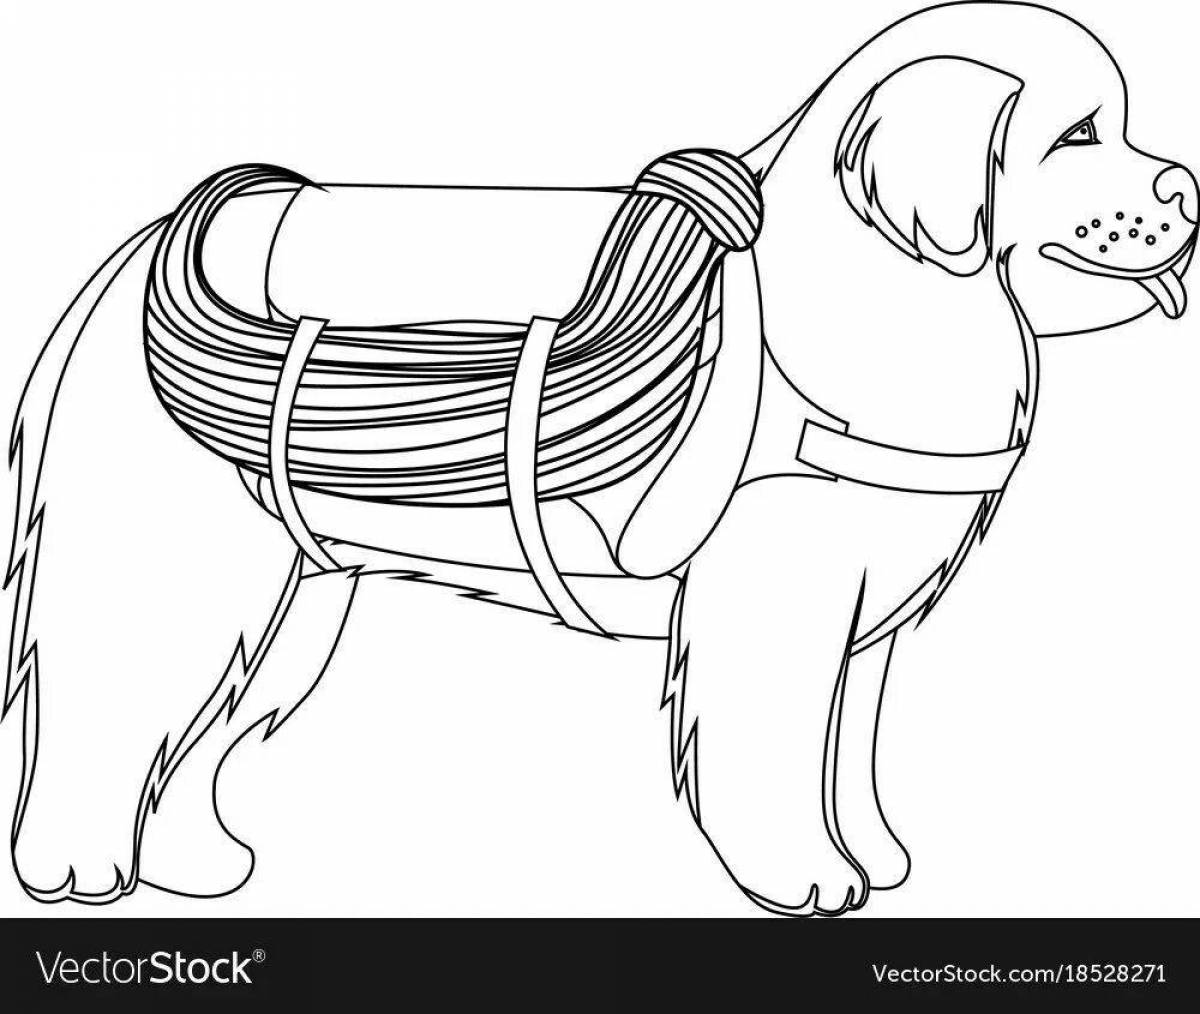 Great service dogs coloring pages for kids